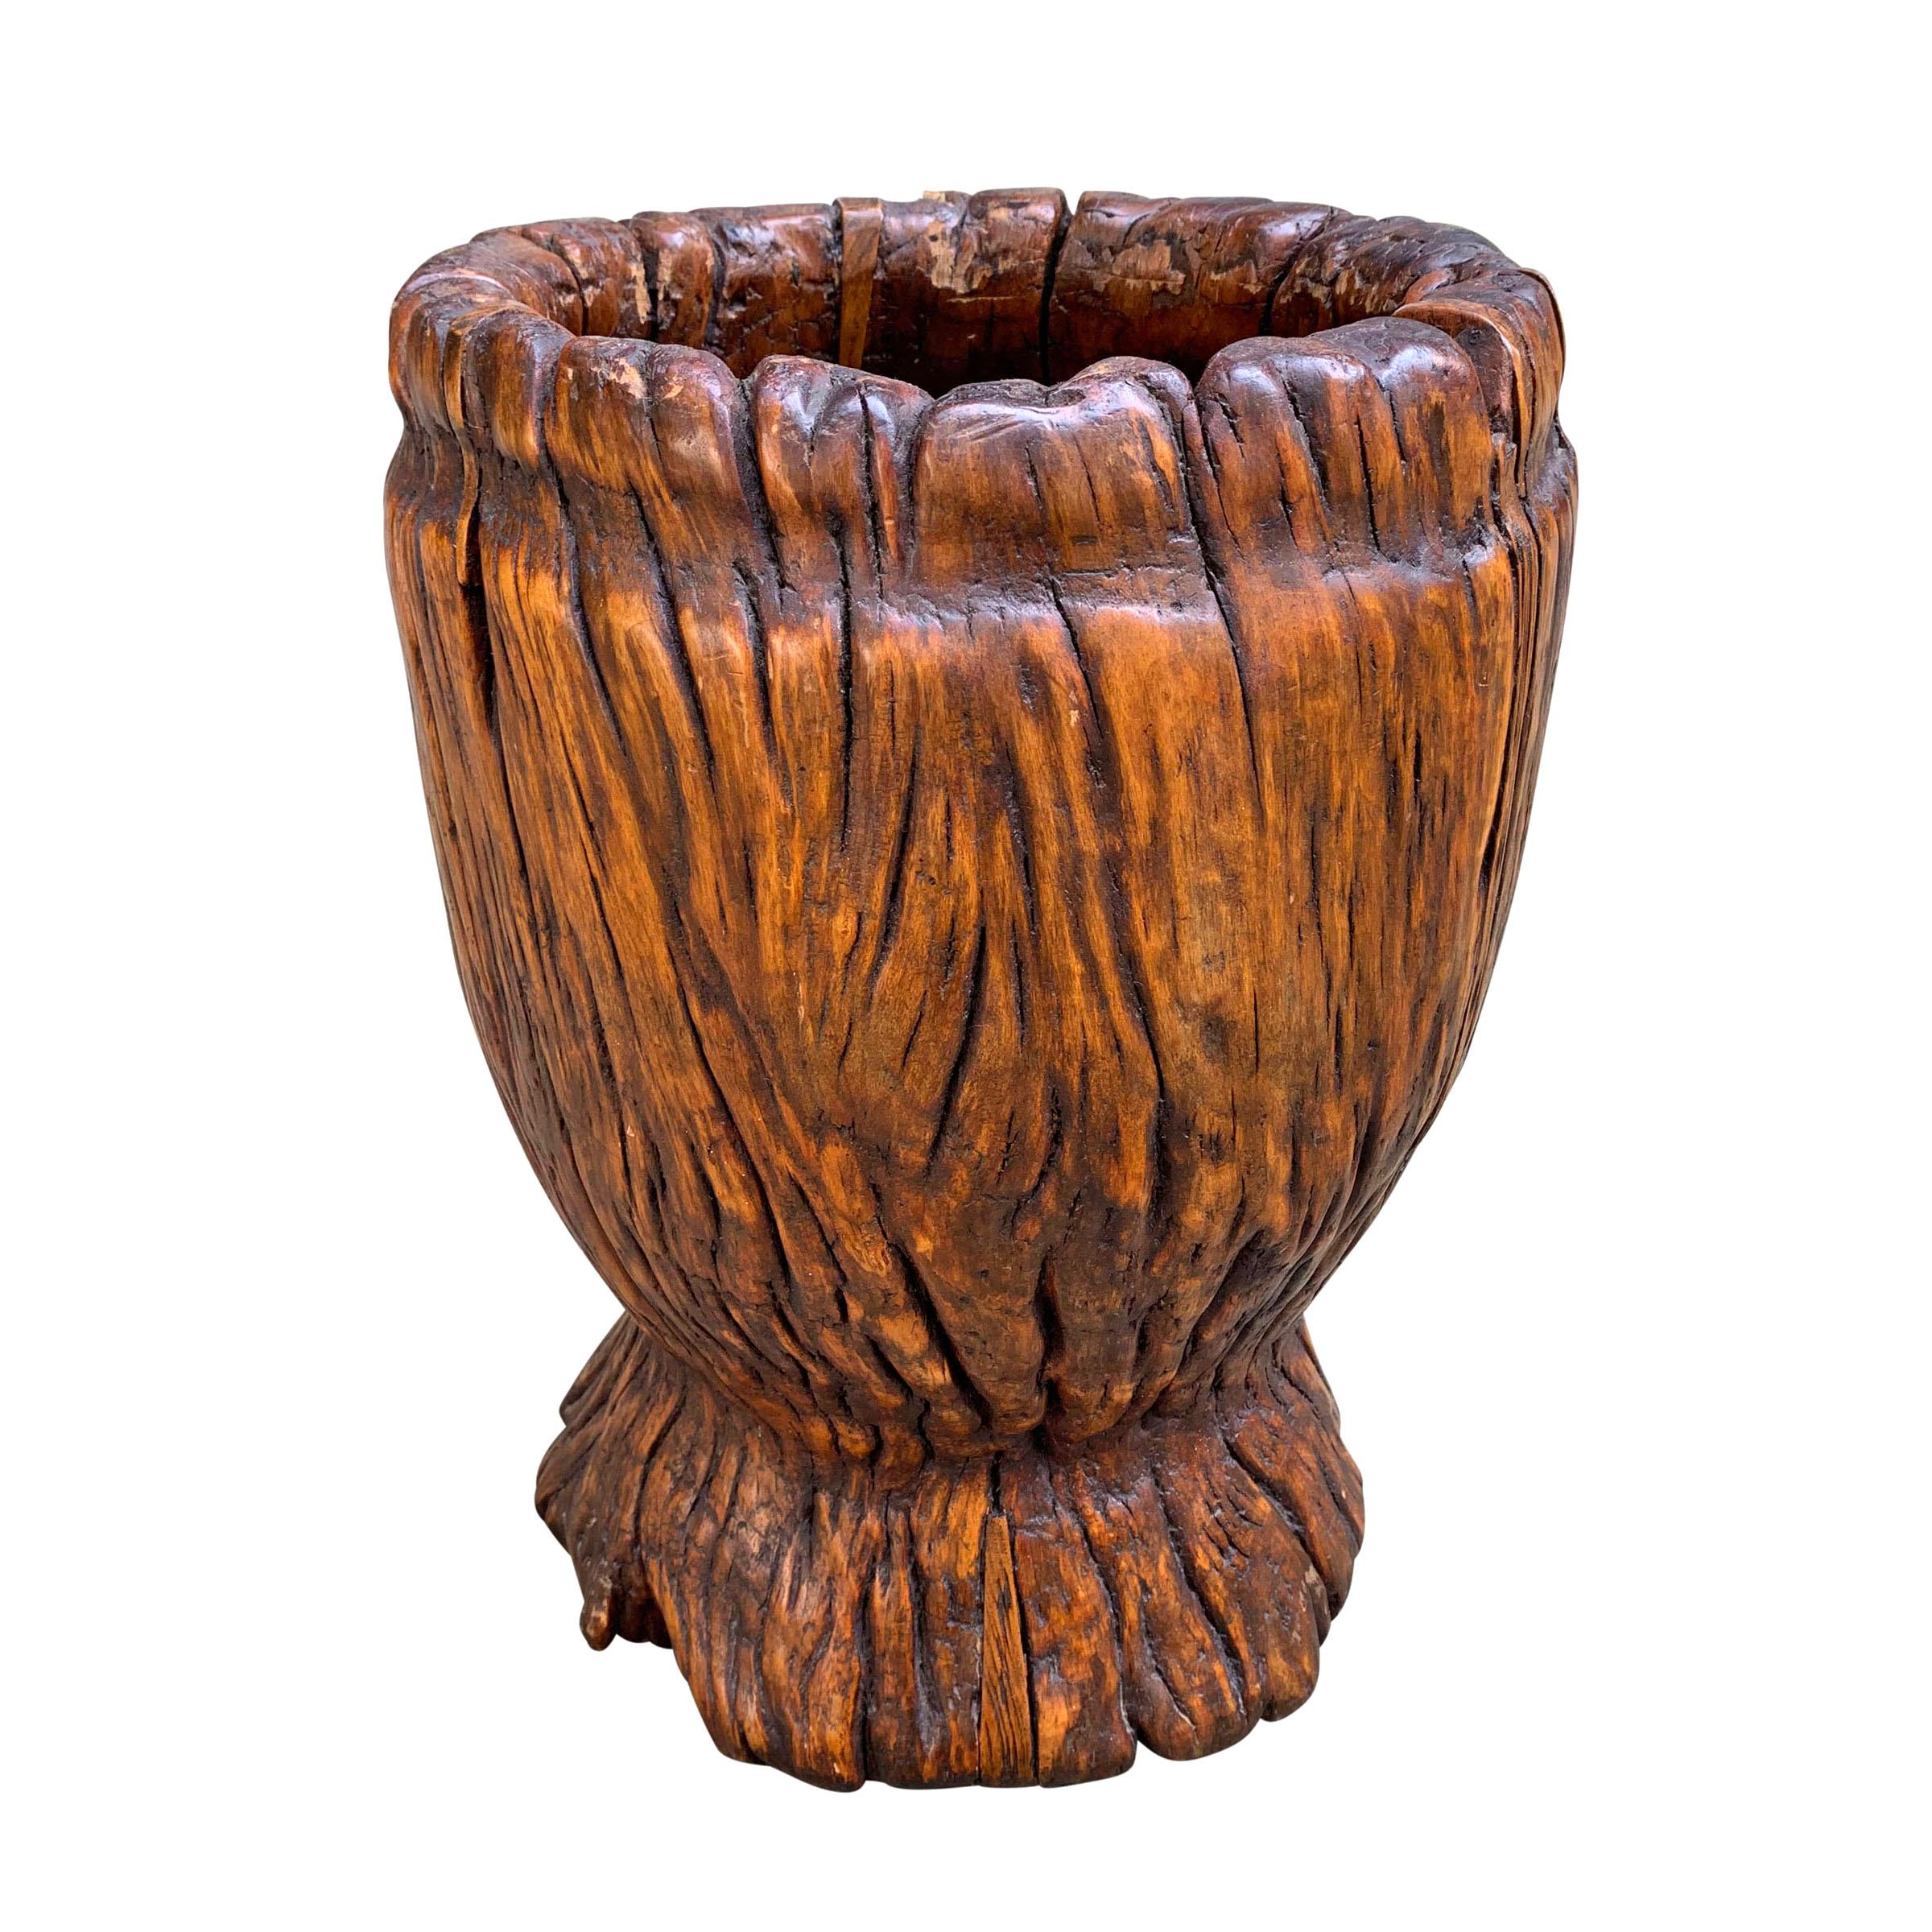 A fantastic sculptural 19th century grain mortar of one piece of wood with a wonderful patina that glows! Would be an incredible waste paper basket in a powder room or office. Could be also be planted with a tree if it were lined.